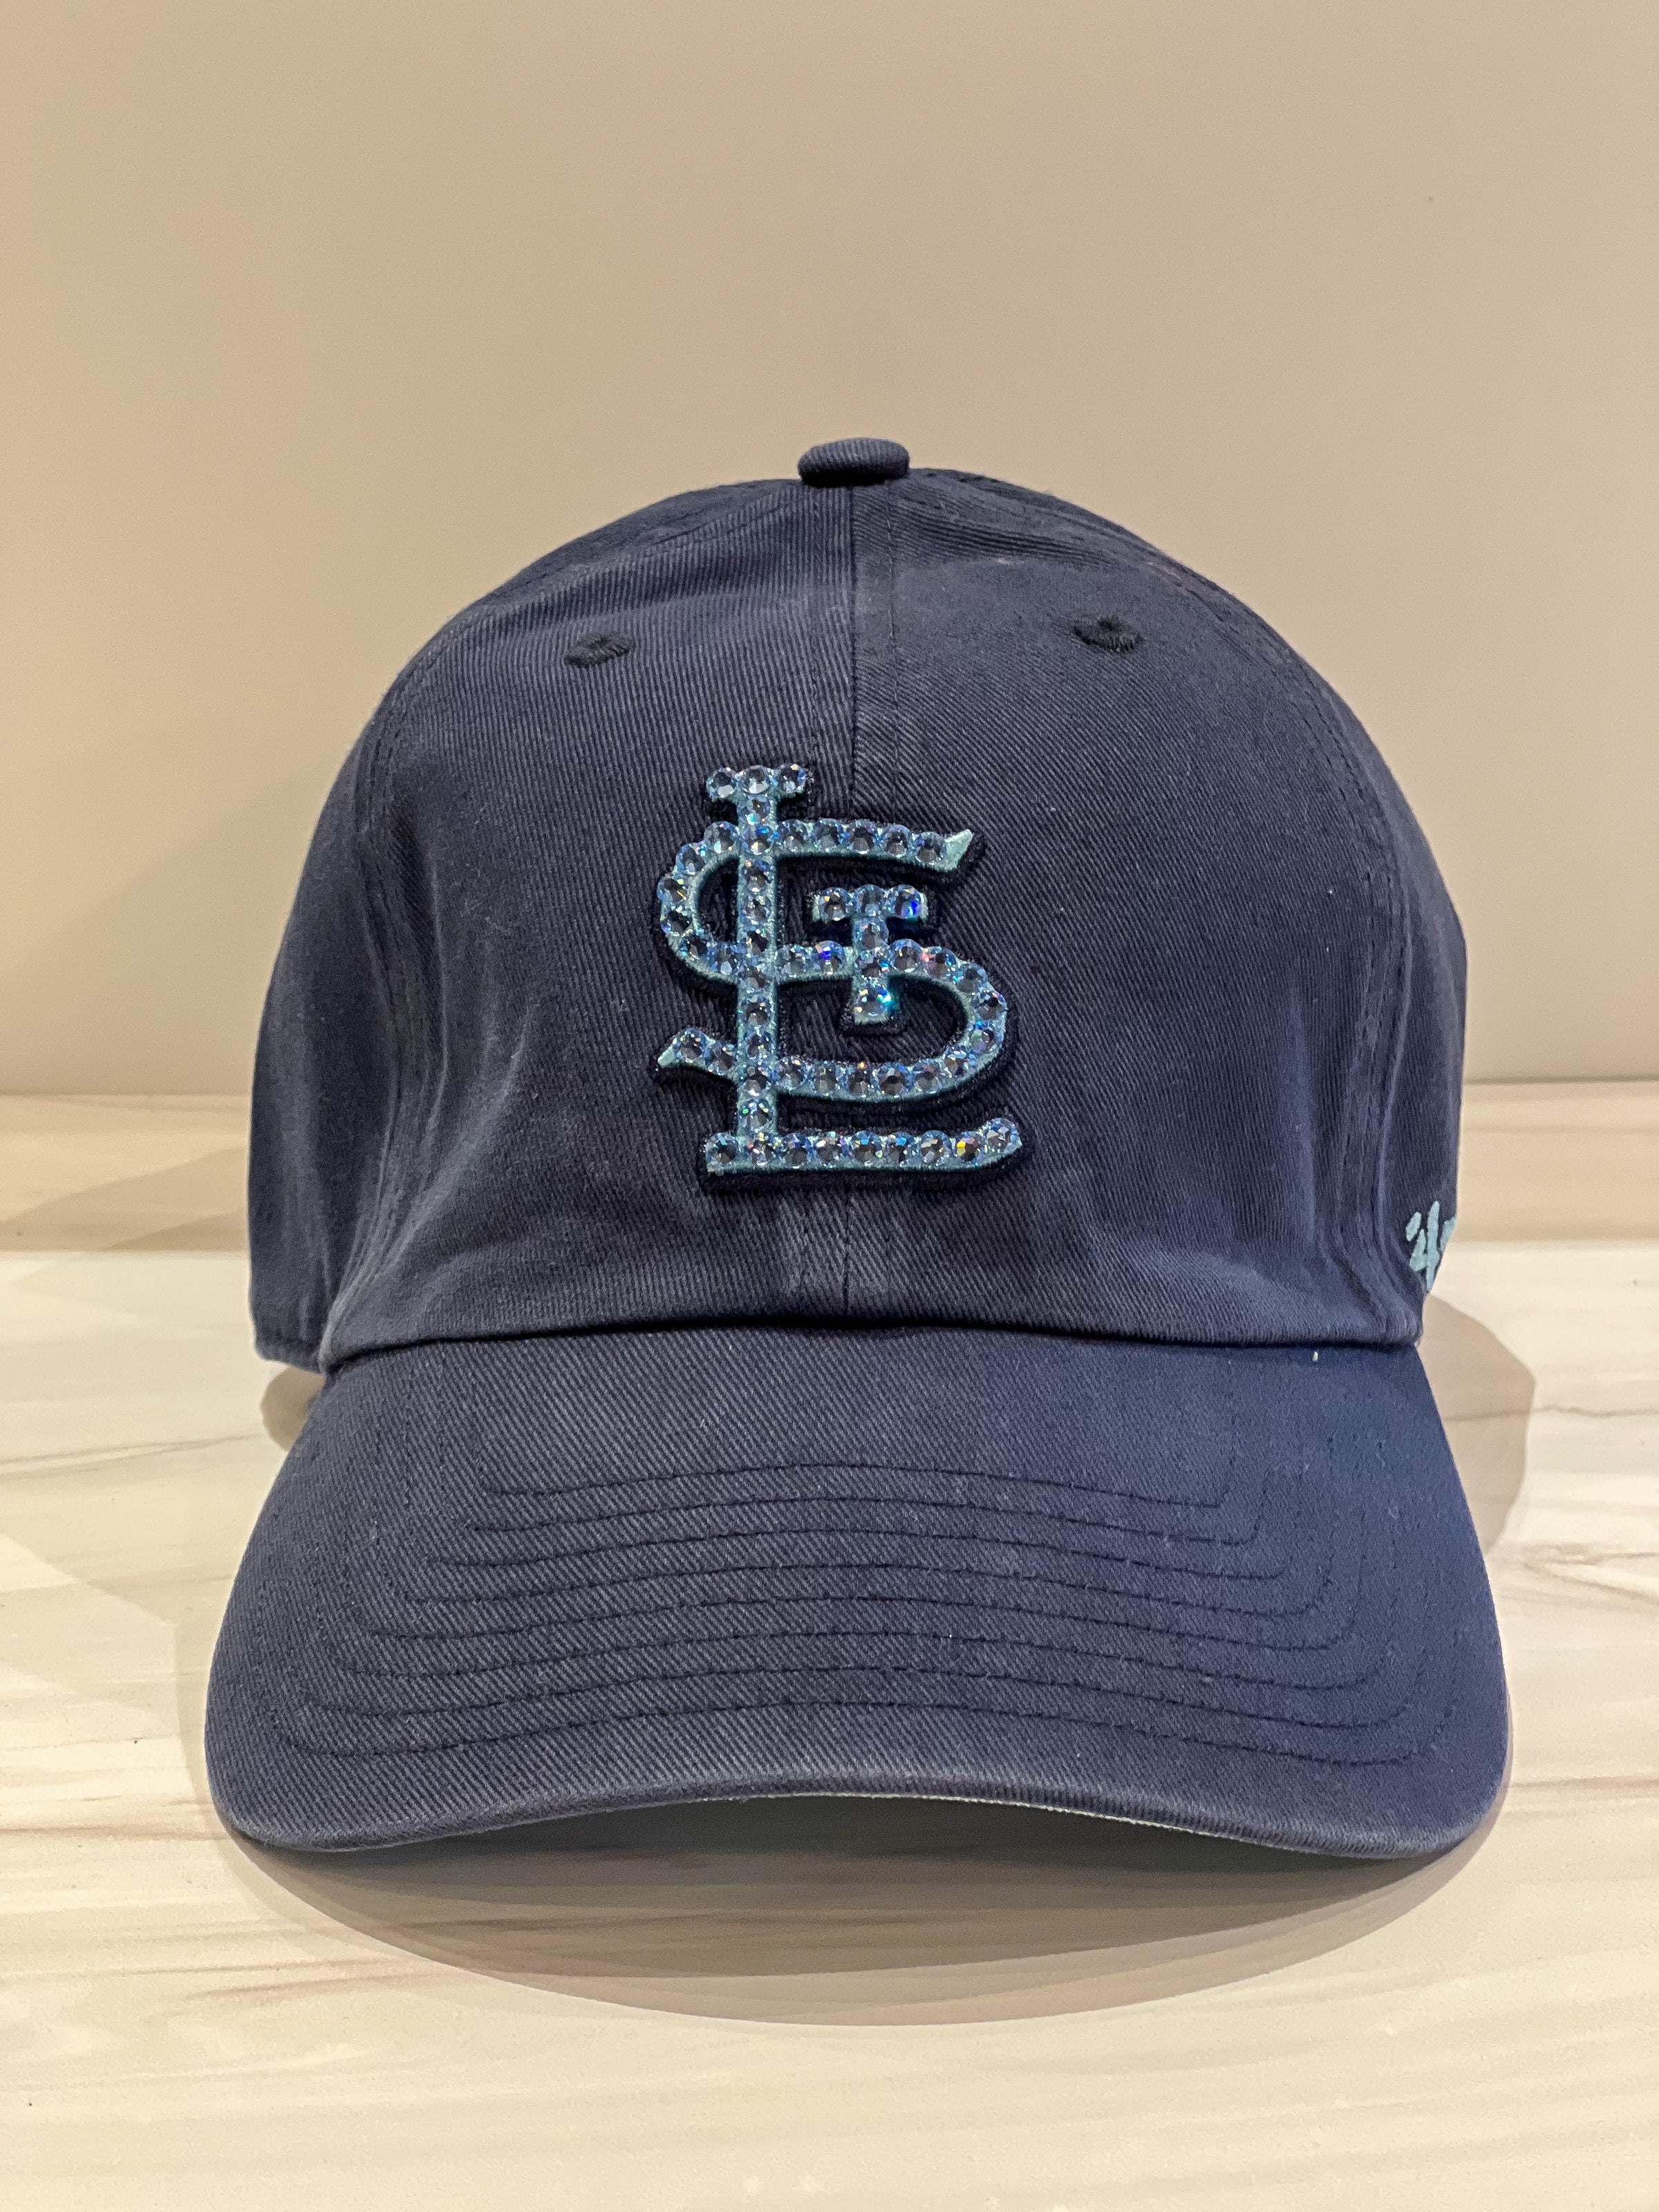 Classic Camo STL Blues Bling Baseball Hat w/Blue Crystals – J.A. Whitney